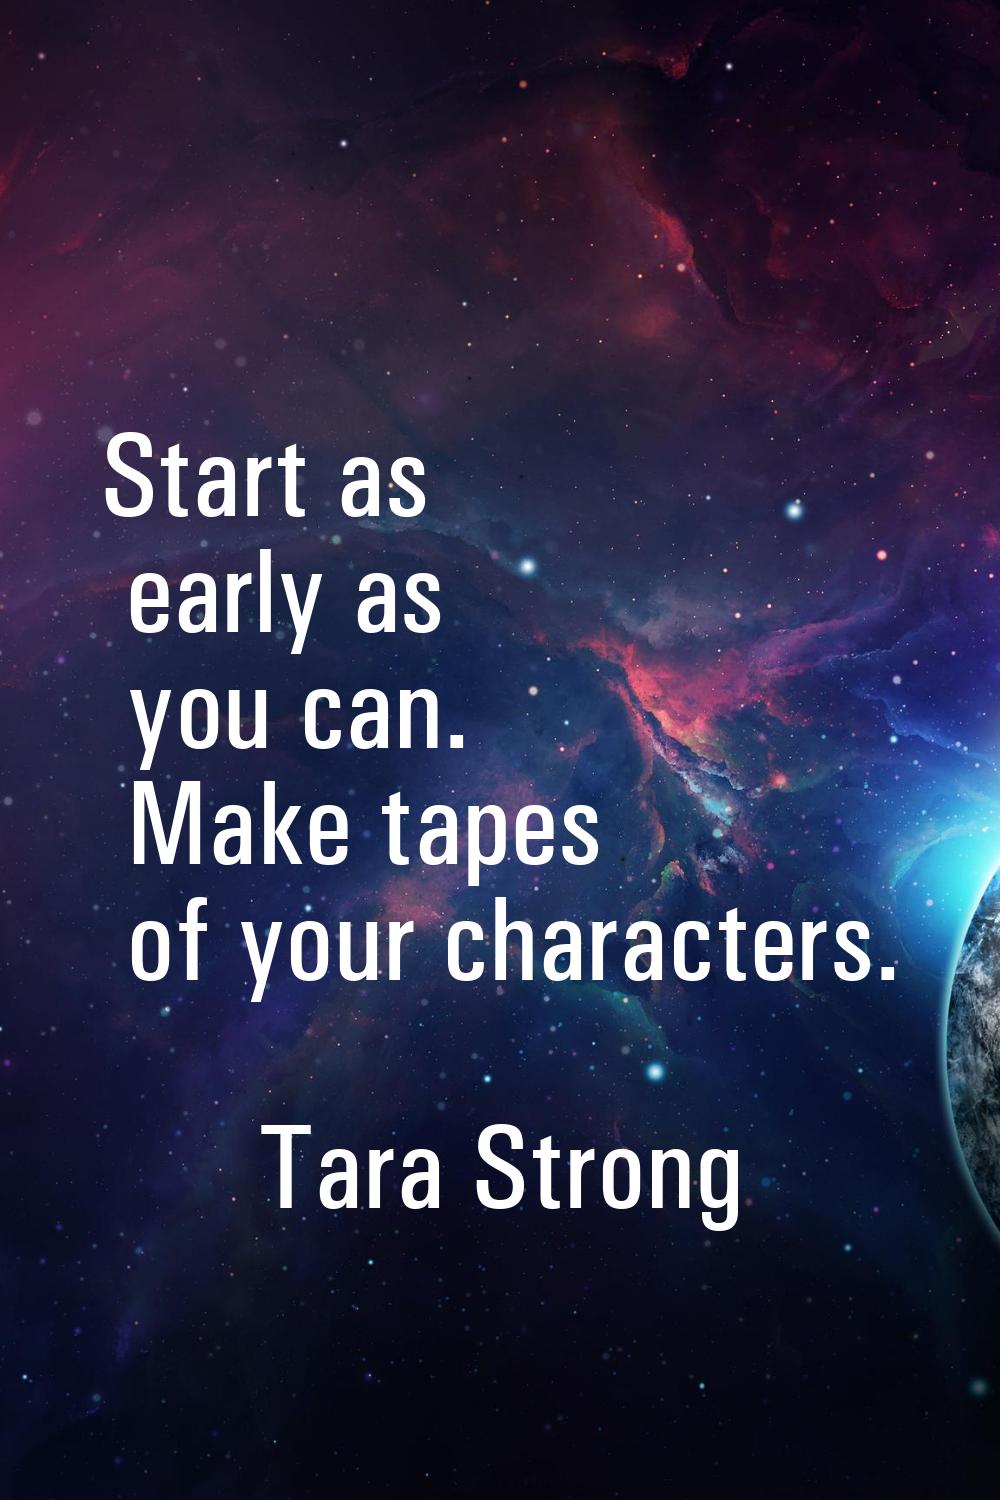 Start as early as you can. Make tapes of your characters.